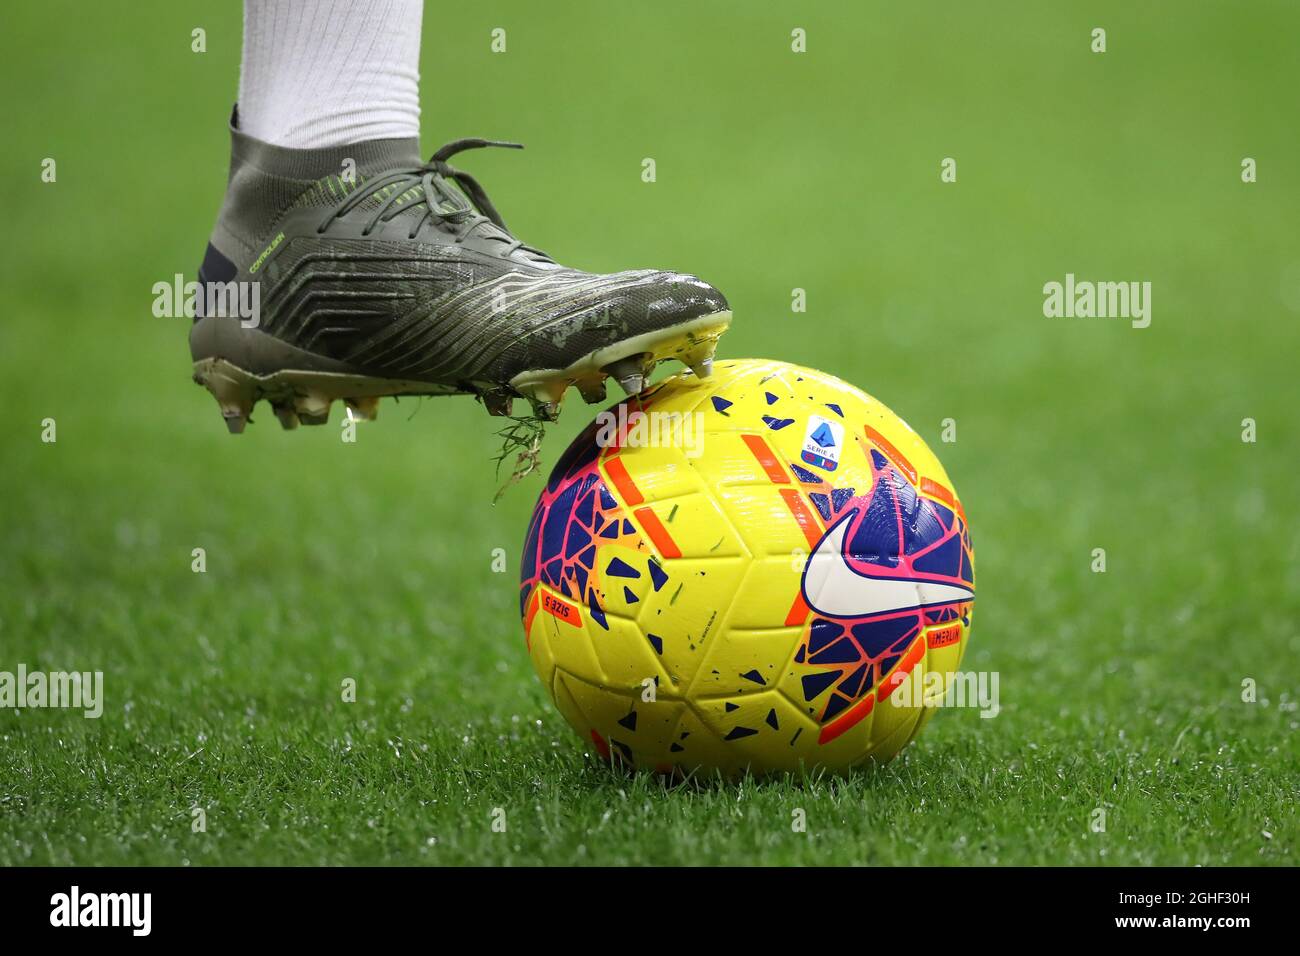 The New Hi-Vis Winter version of the Nike Merlin official Serie A match  ball during the Serie A match at Giuseppe Meazza, Milan. Picture date: 3rd  November 2019. Picture credit should read: